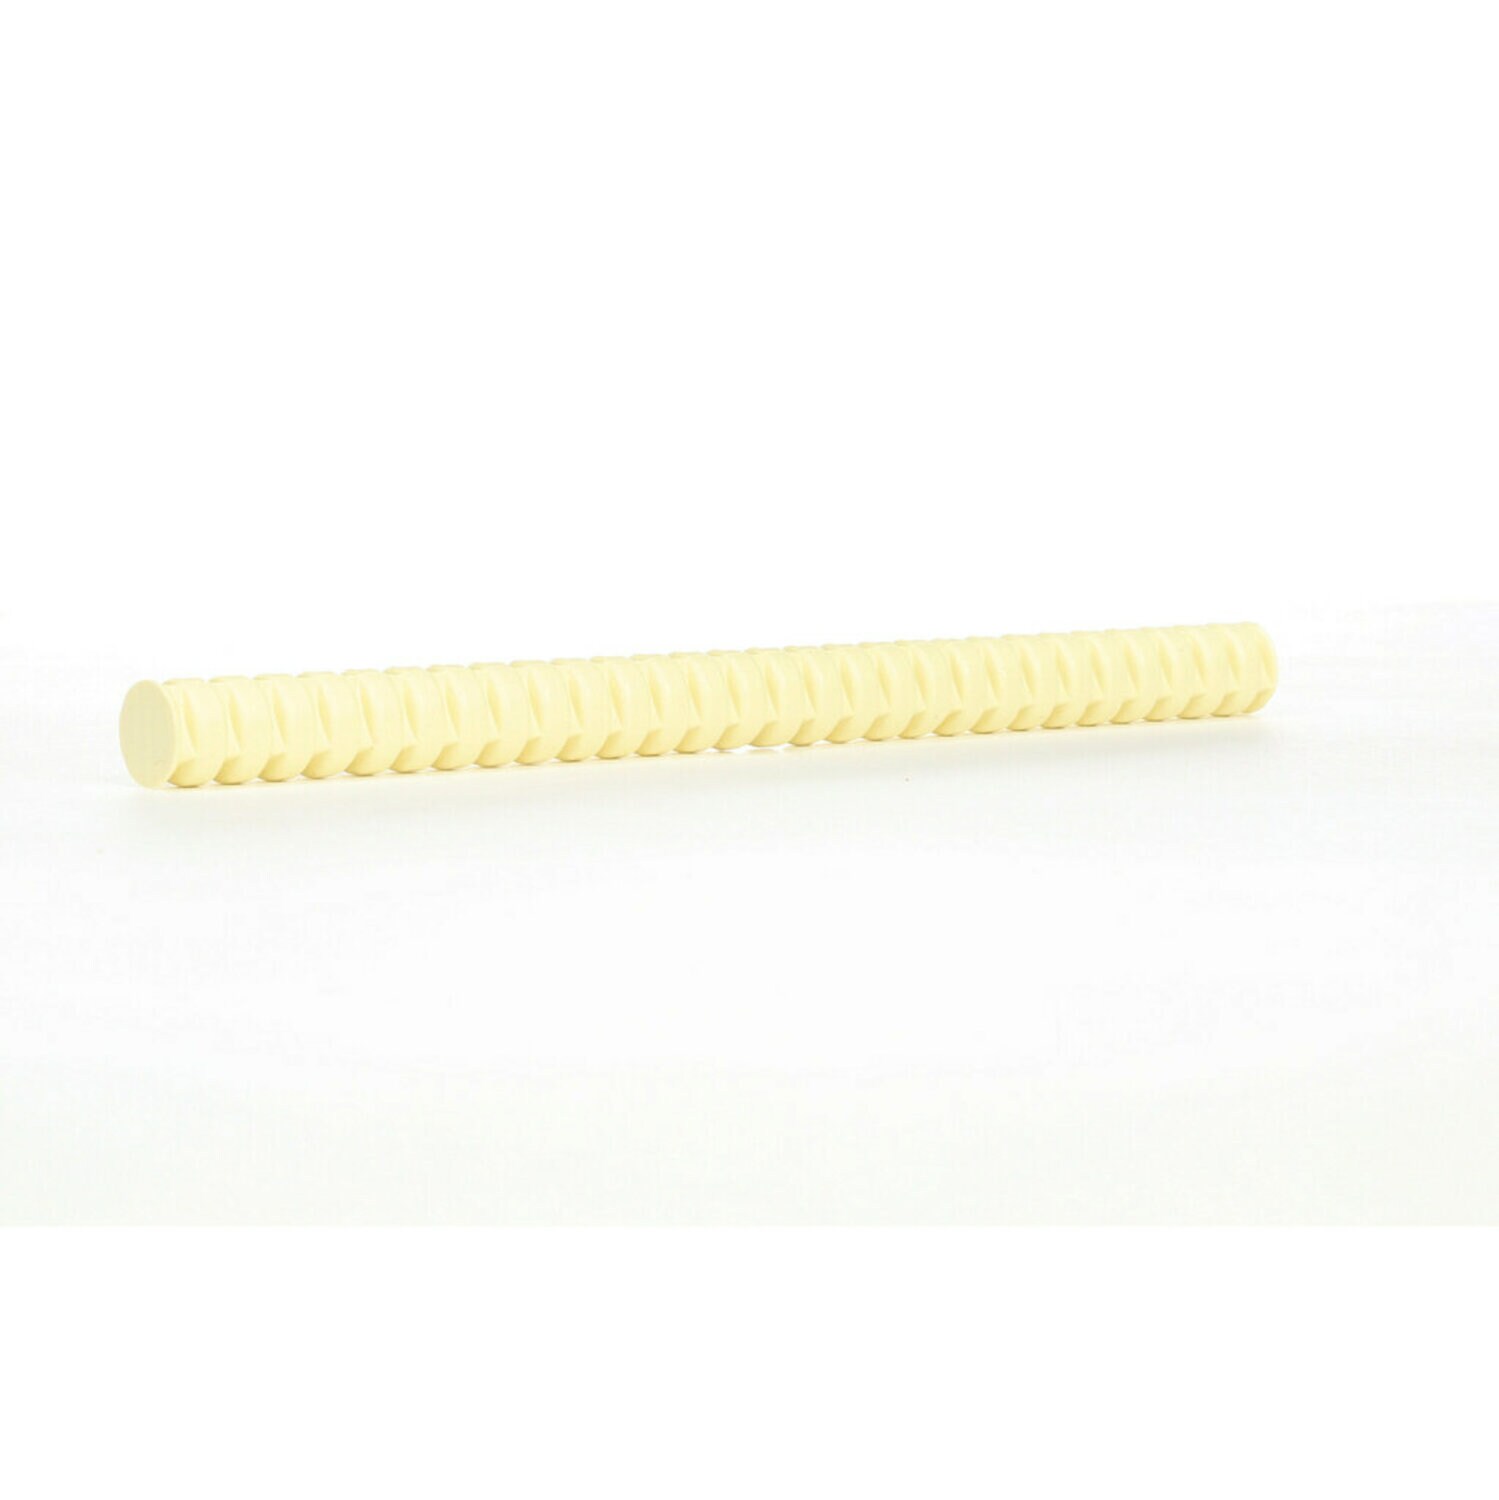 7000000887 - 3M Hot Melt Adhesive 3748V0 Q, Light Yellow, 5/8 in x 8 in, 11 lb, Case